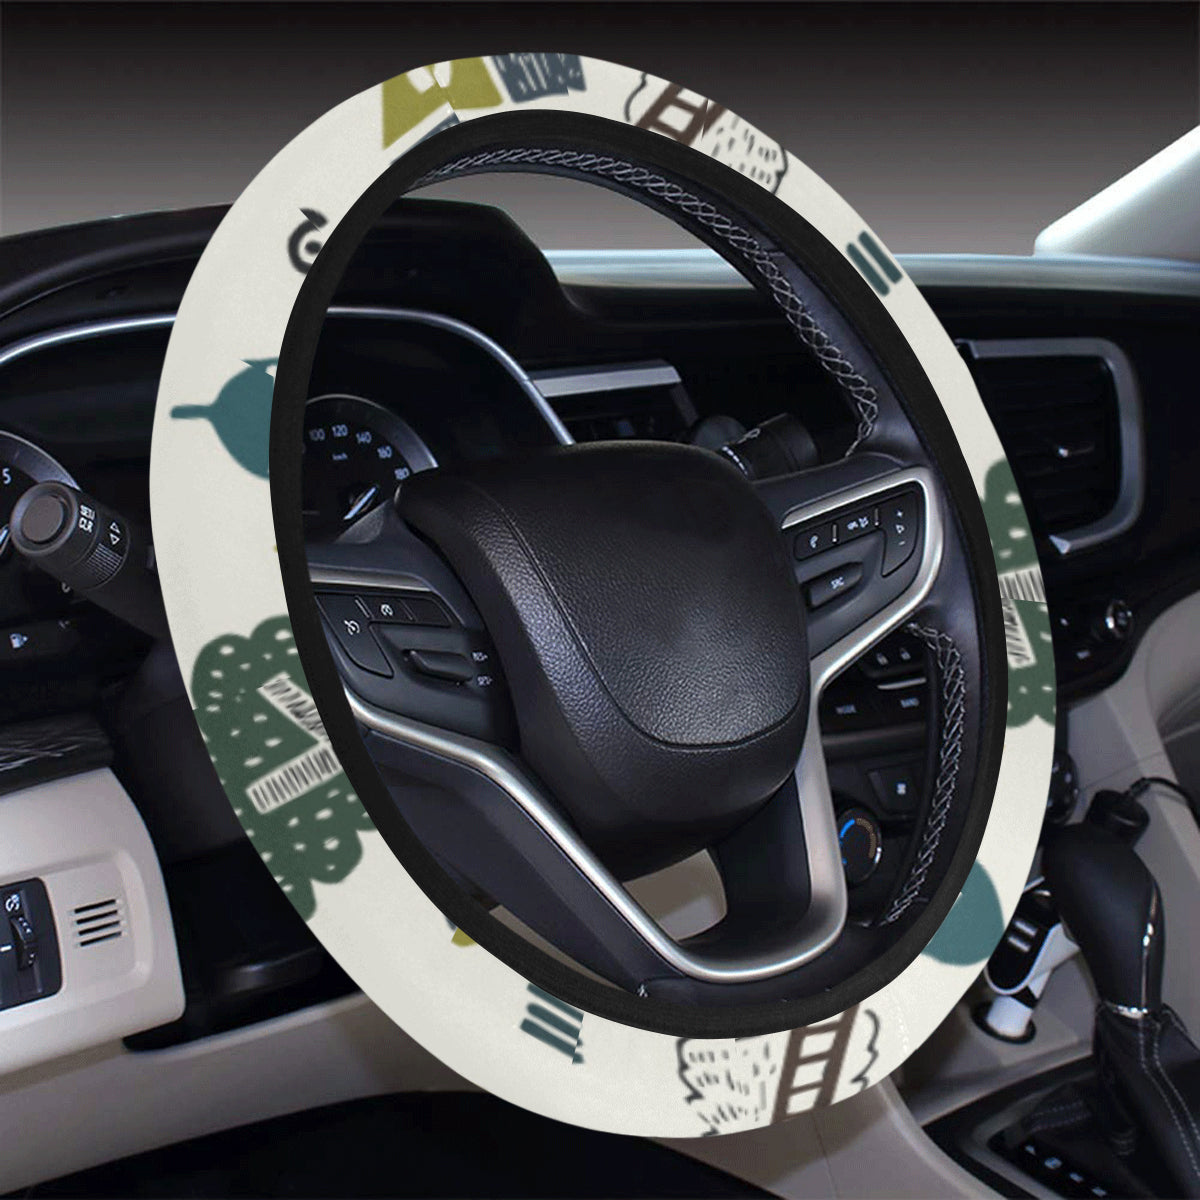 Agricultural Farm Print Design 01 Steering Wheel Cover with Elastic Edge